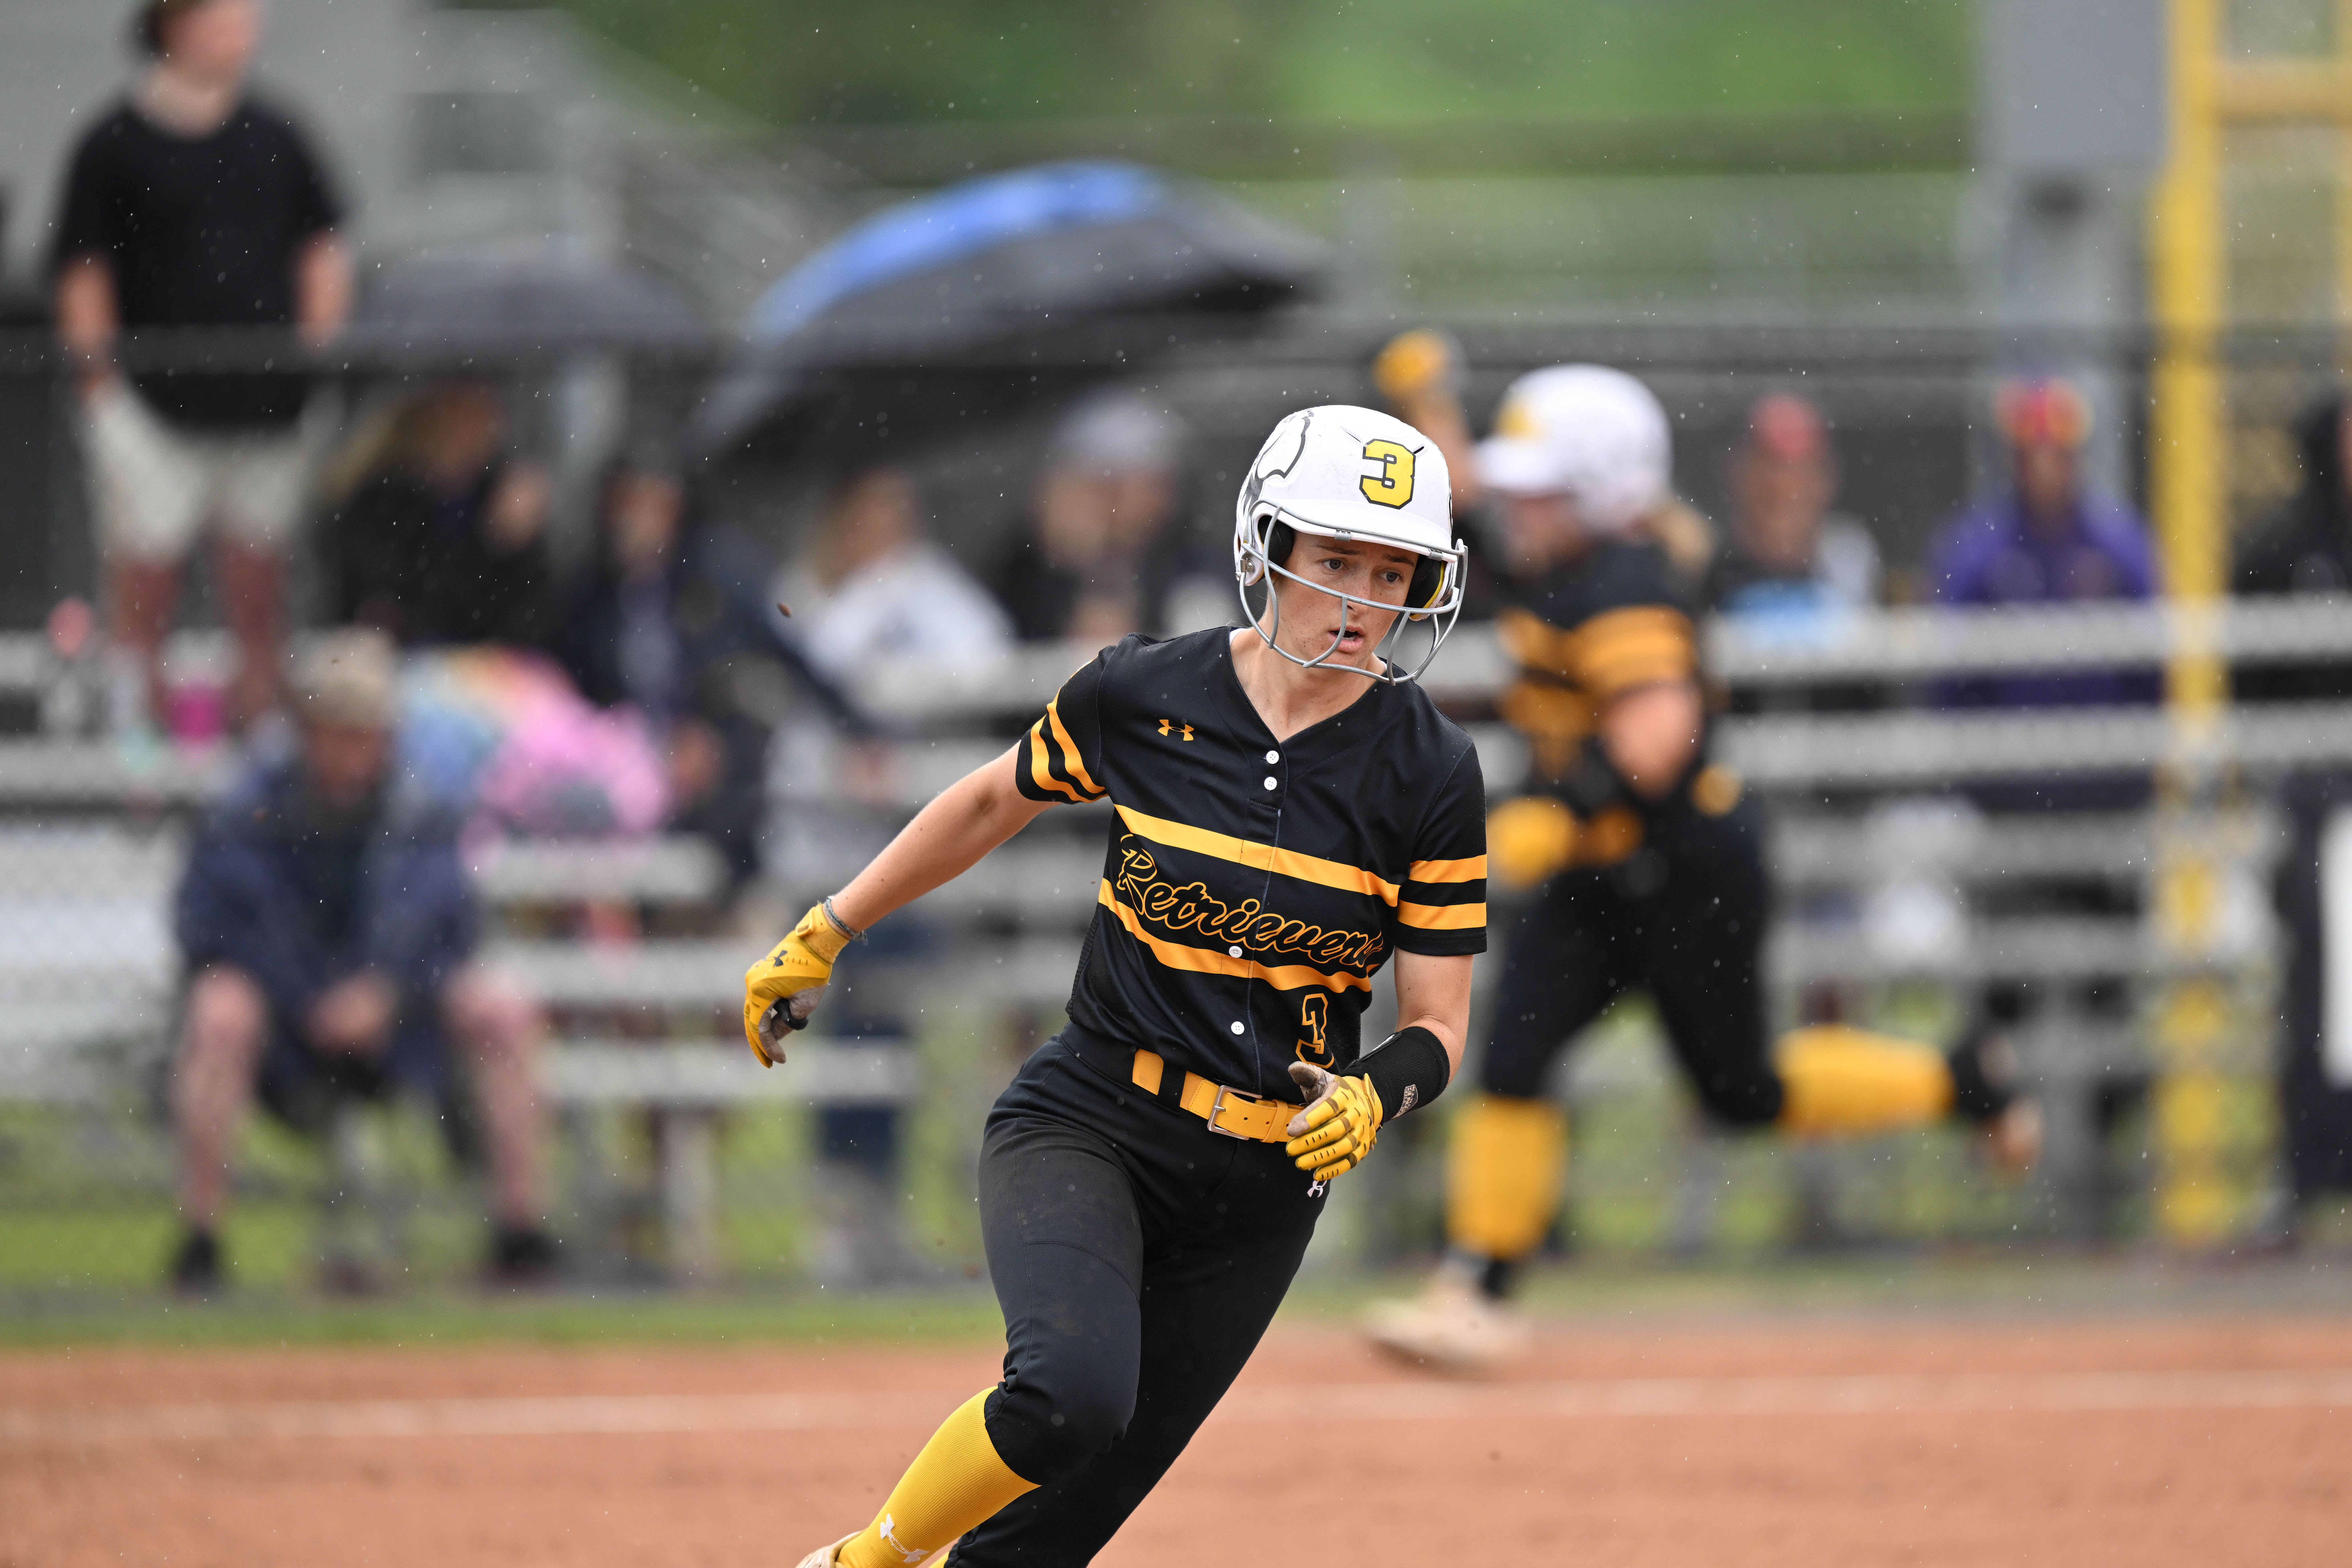 A softball player with a helmet on and a black and gold UMBC uniform runs the bases